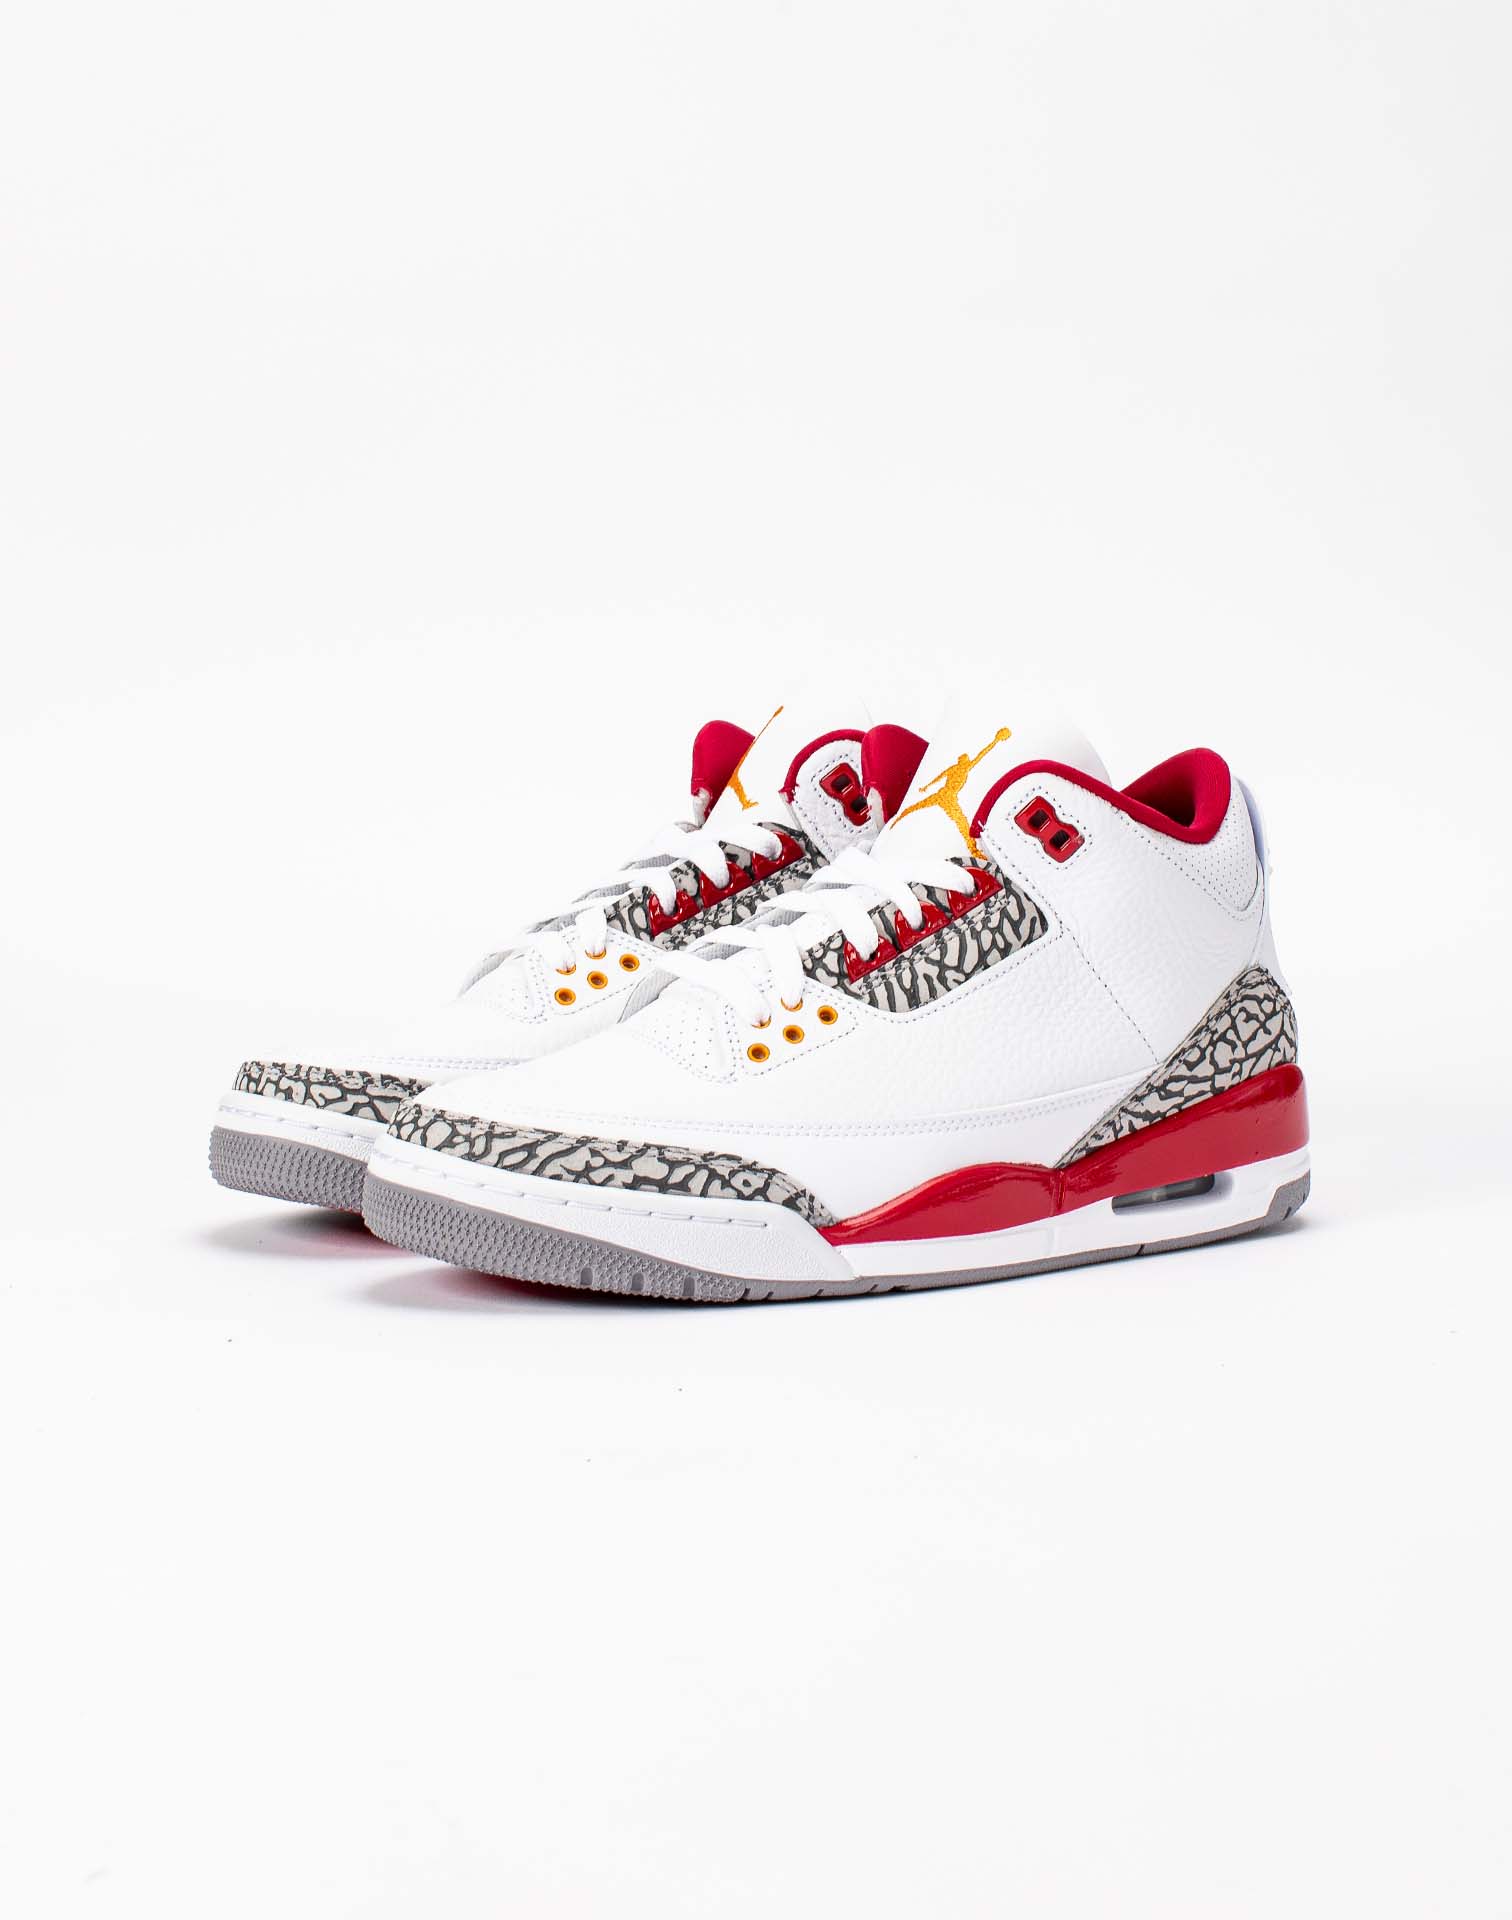 This Air Jordan 3 Retro Plays for the Washington Wizards – DTLR